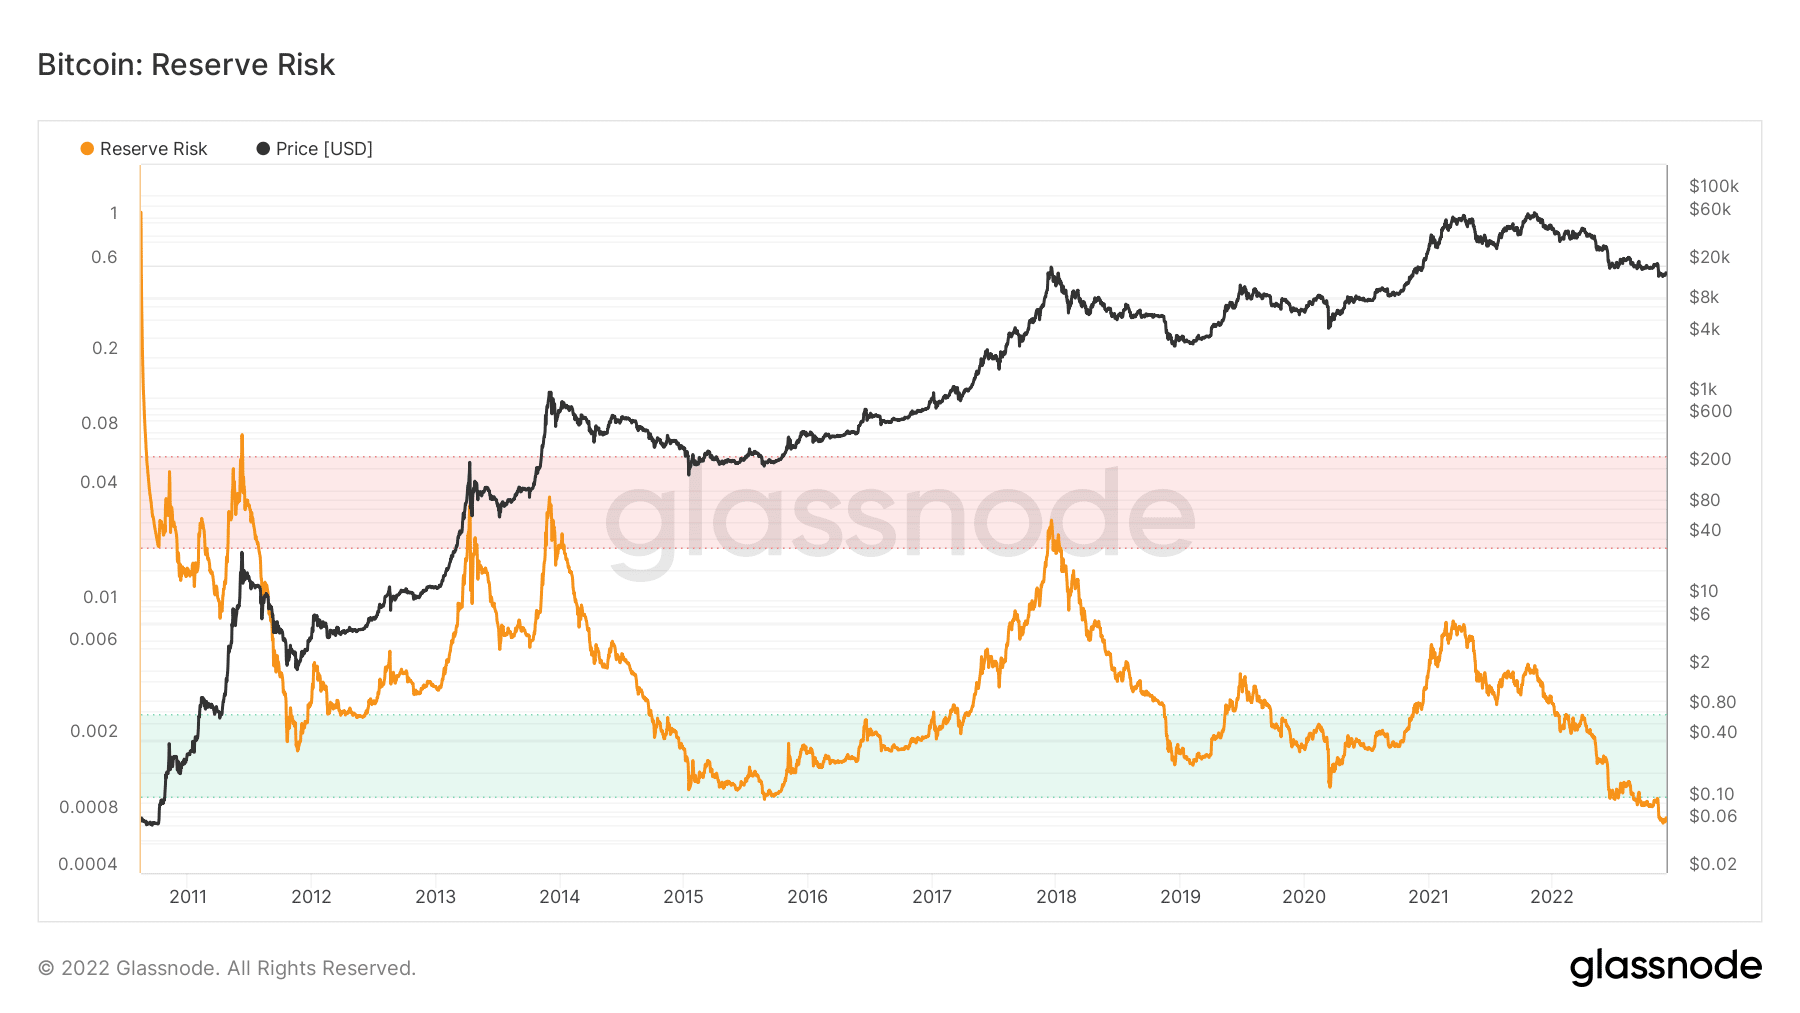 Bitcoin reserve risk and price